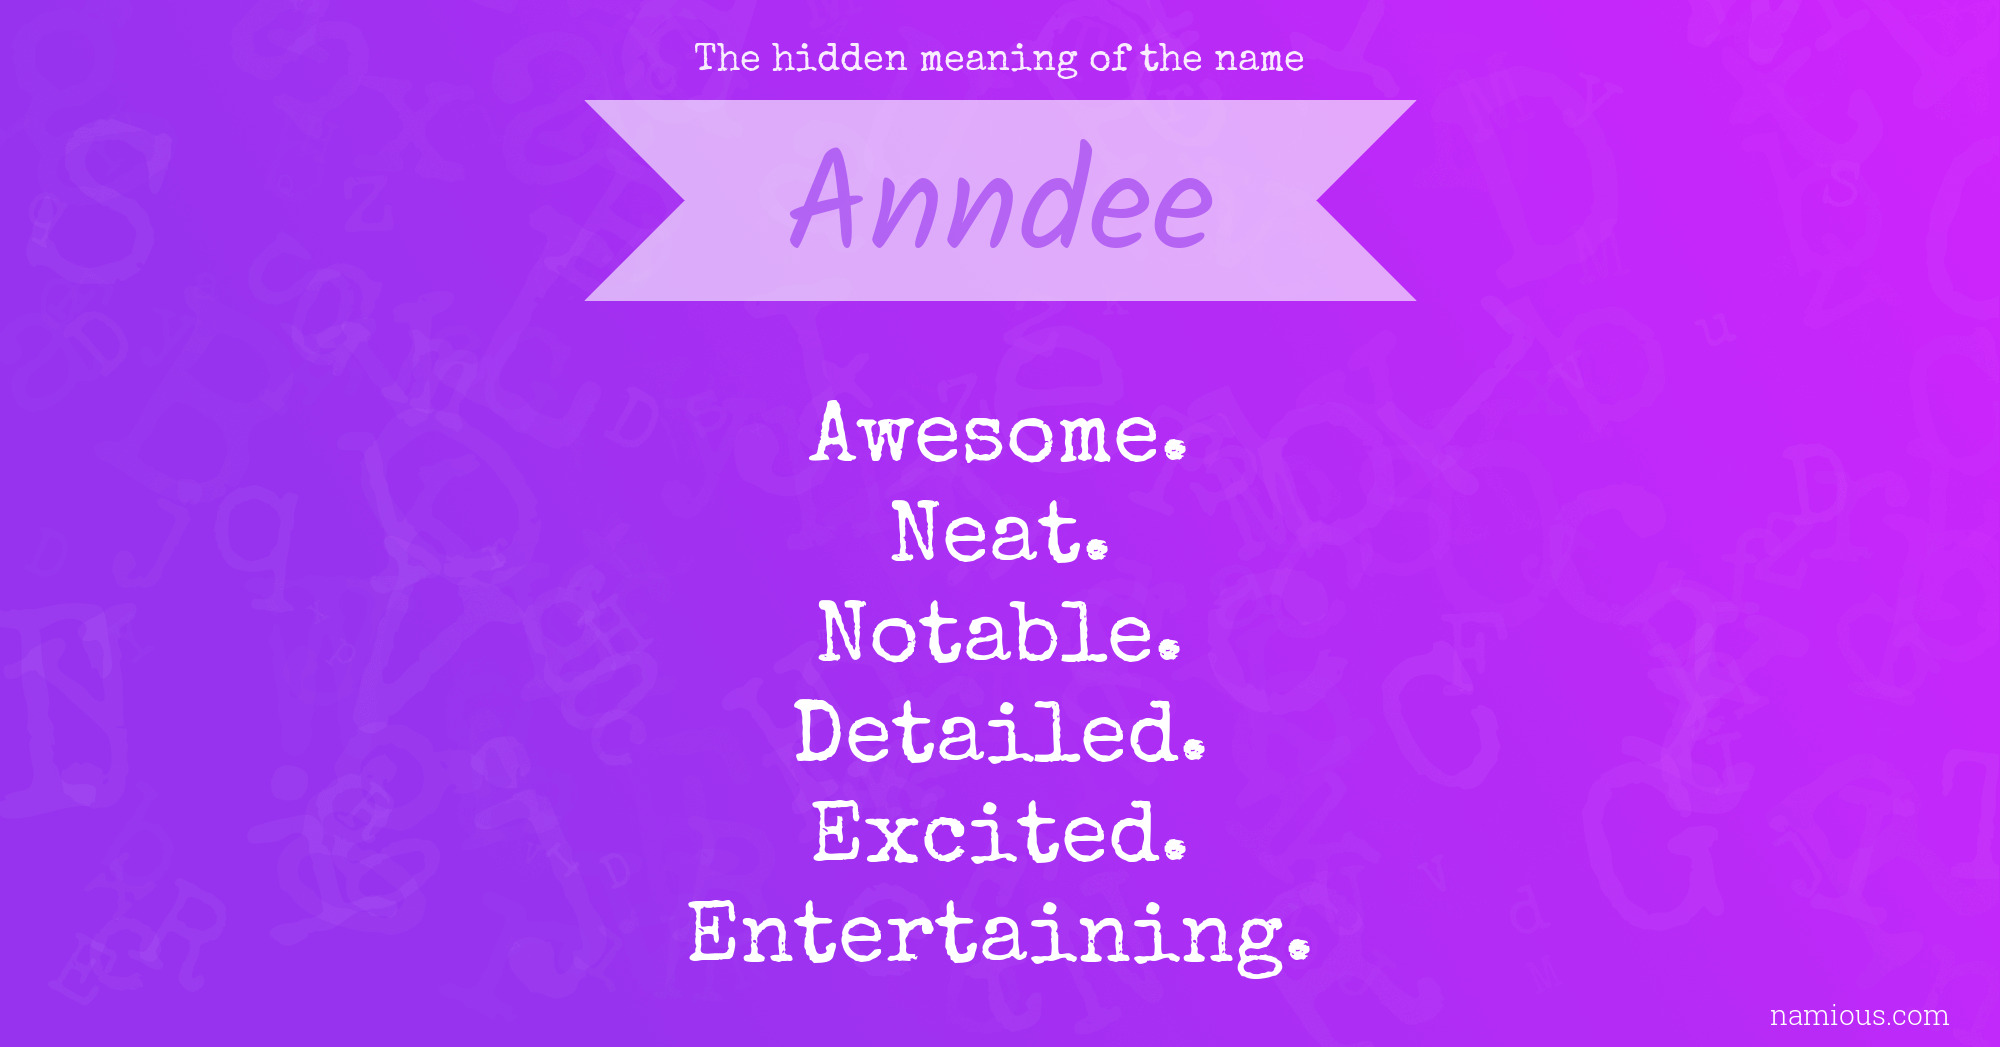 The hidden meaning of the name Anndee